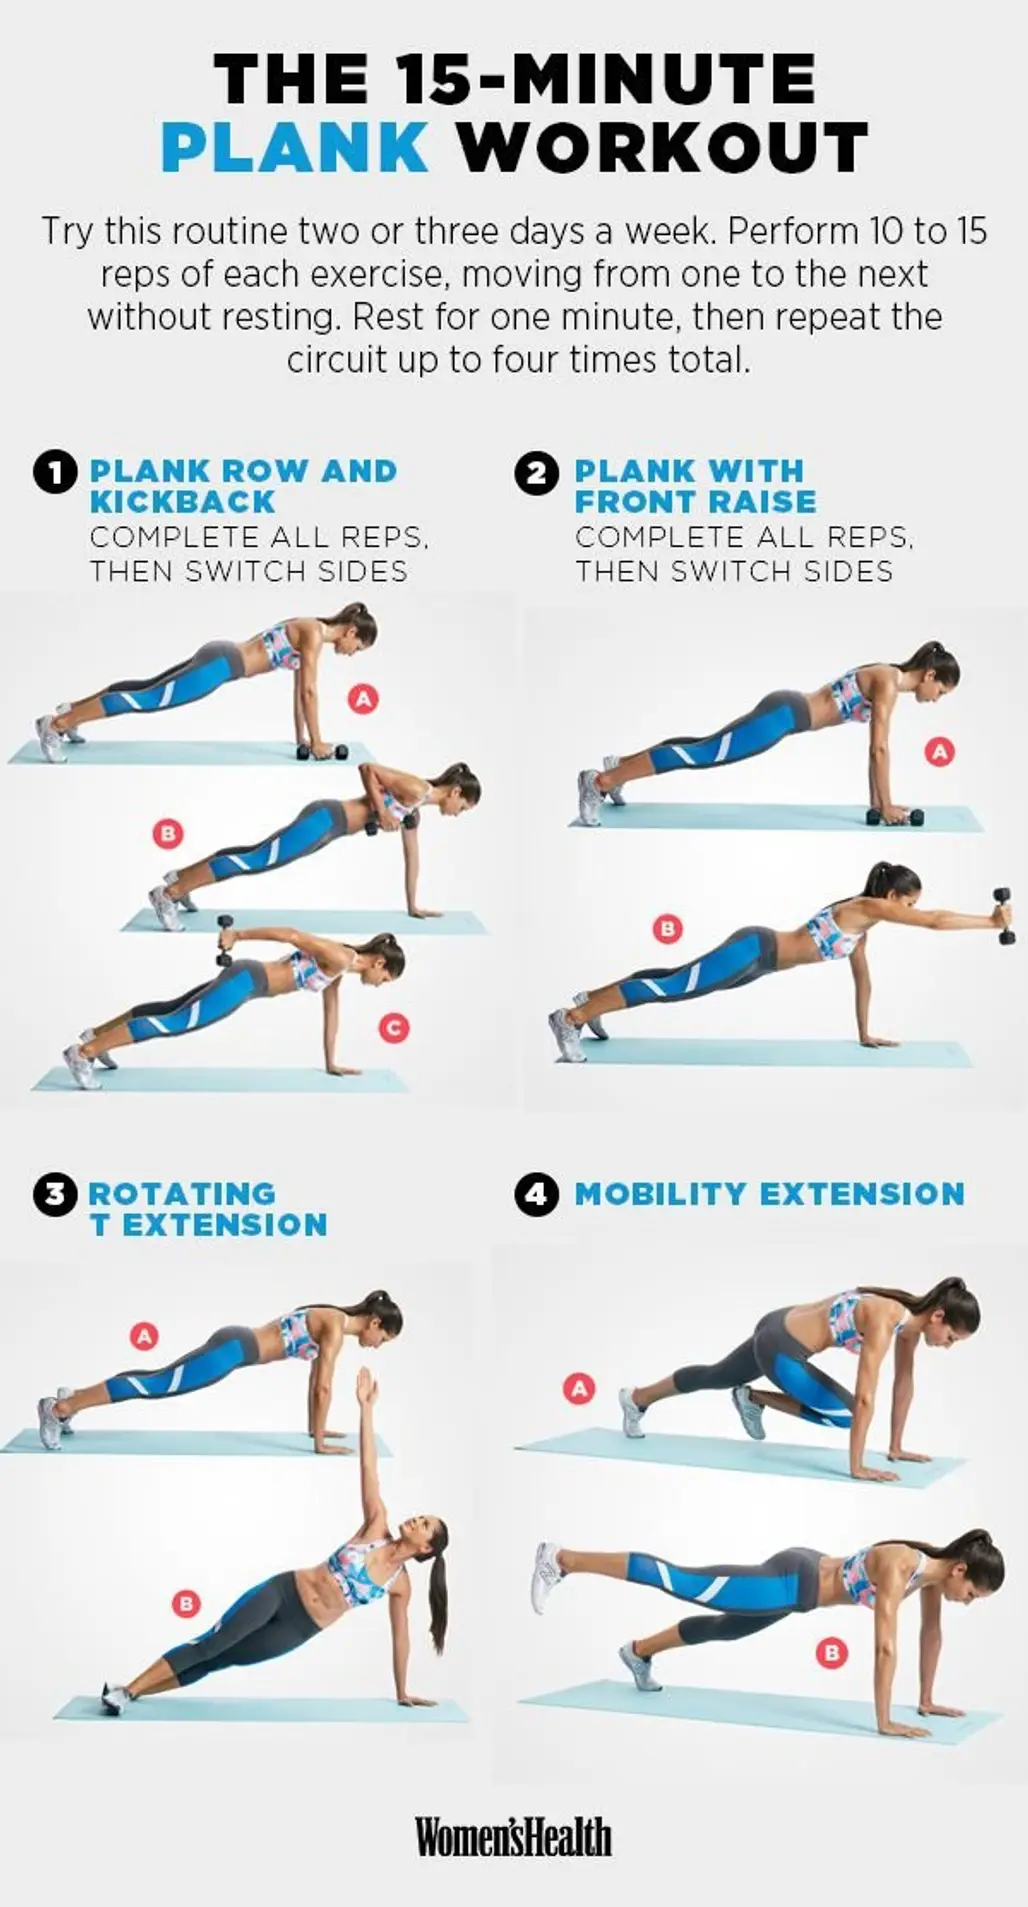 The Plank Workout